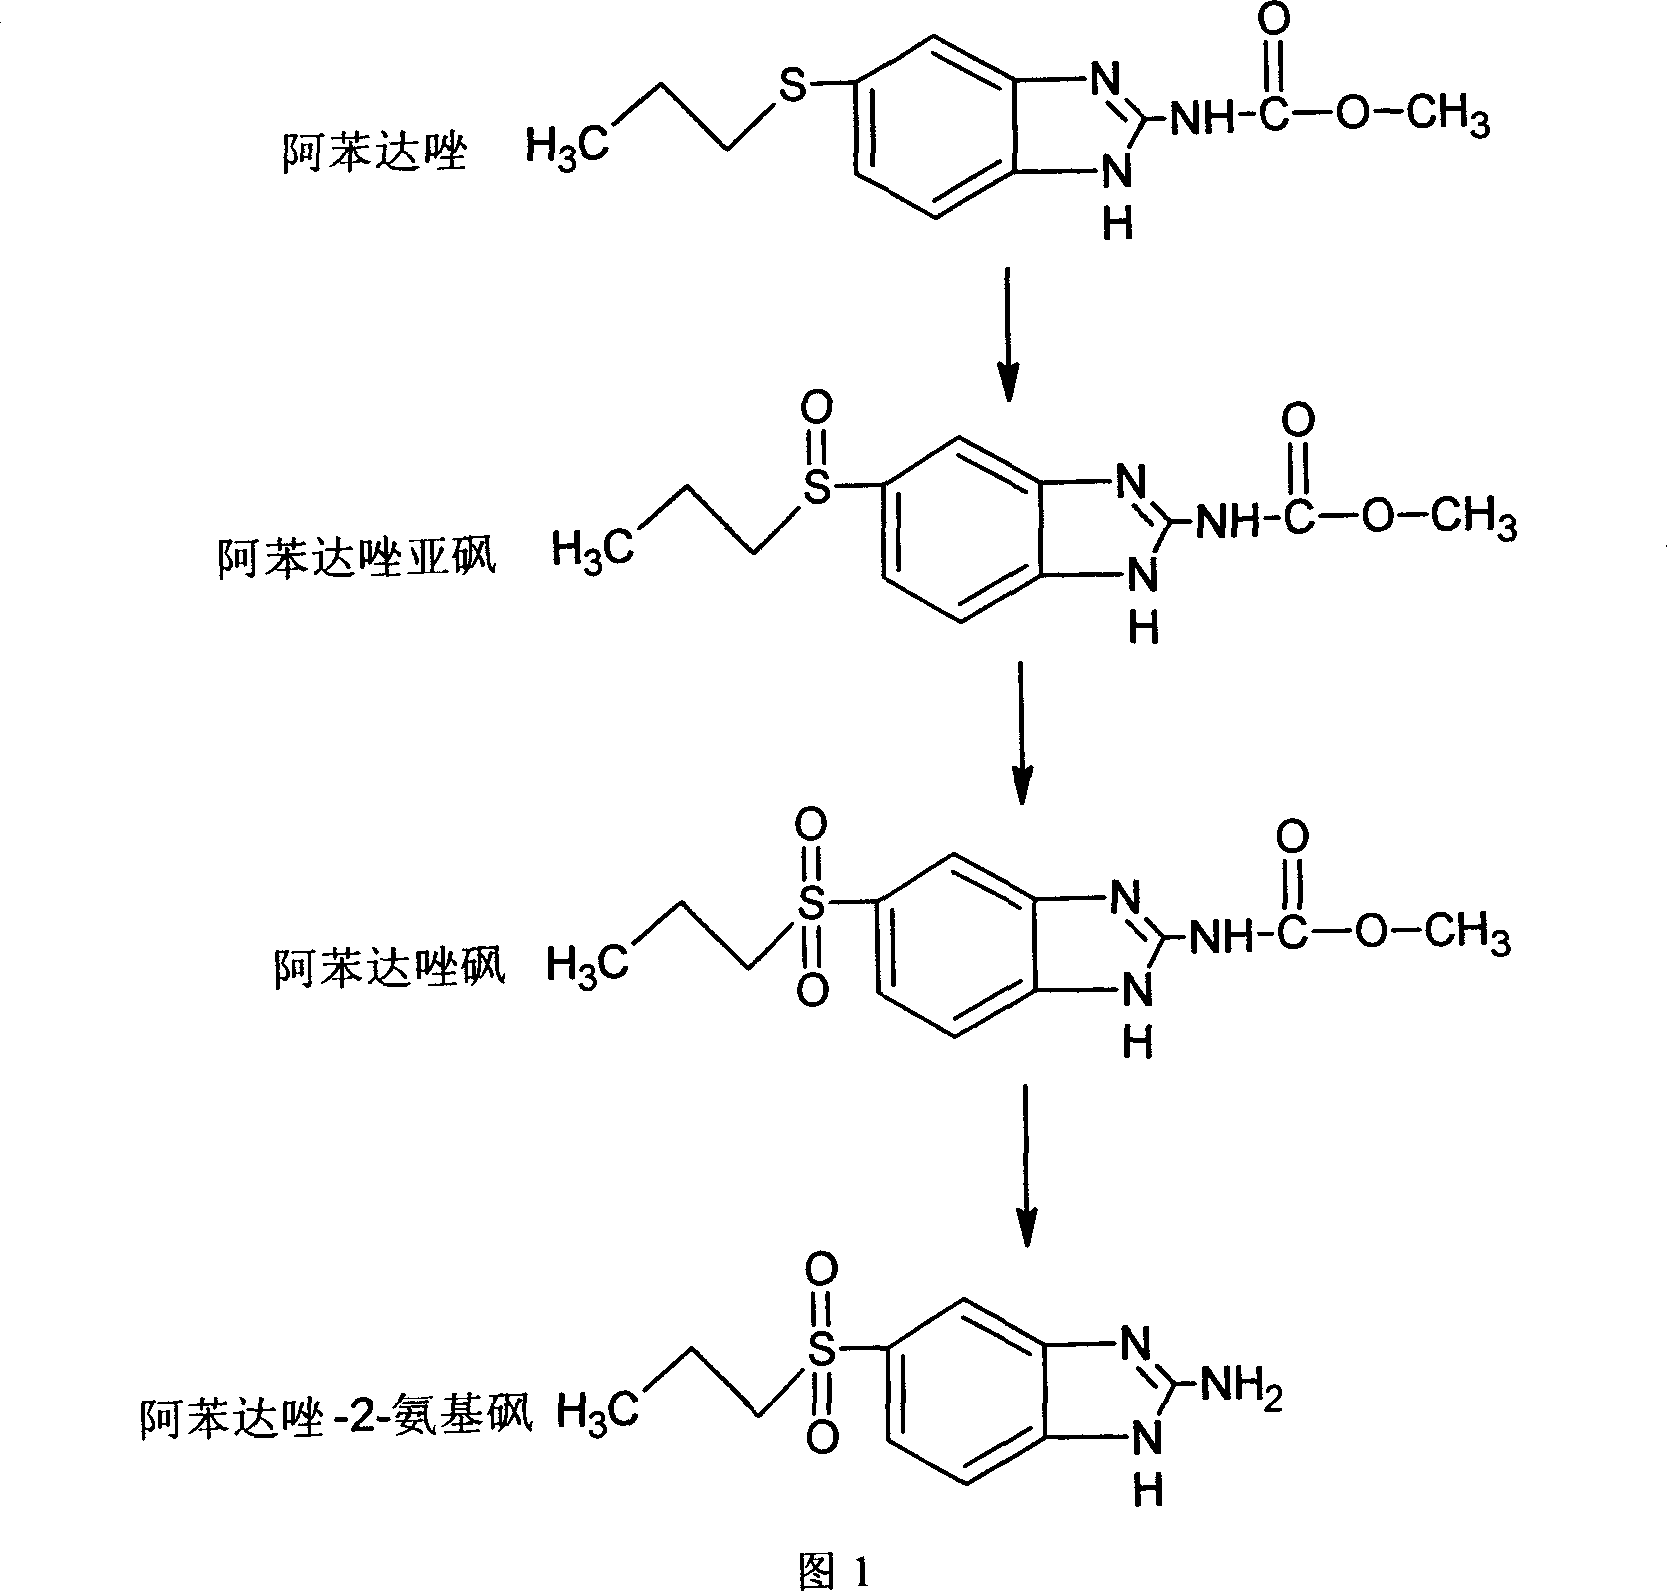 Chemical synthesis of albendazole-2-amino-sulphone